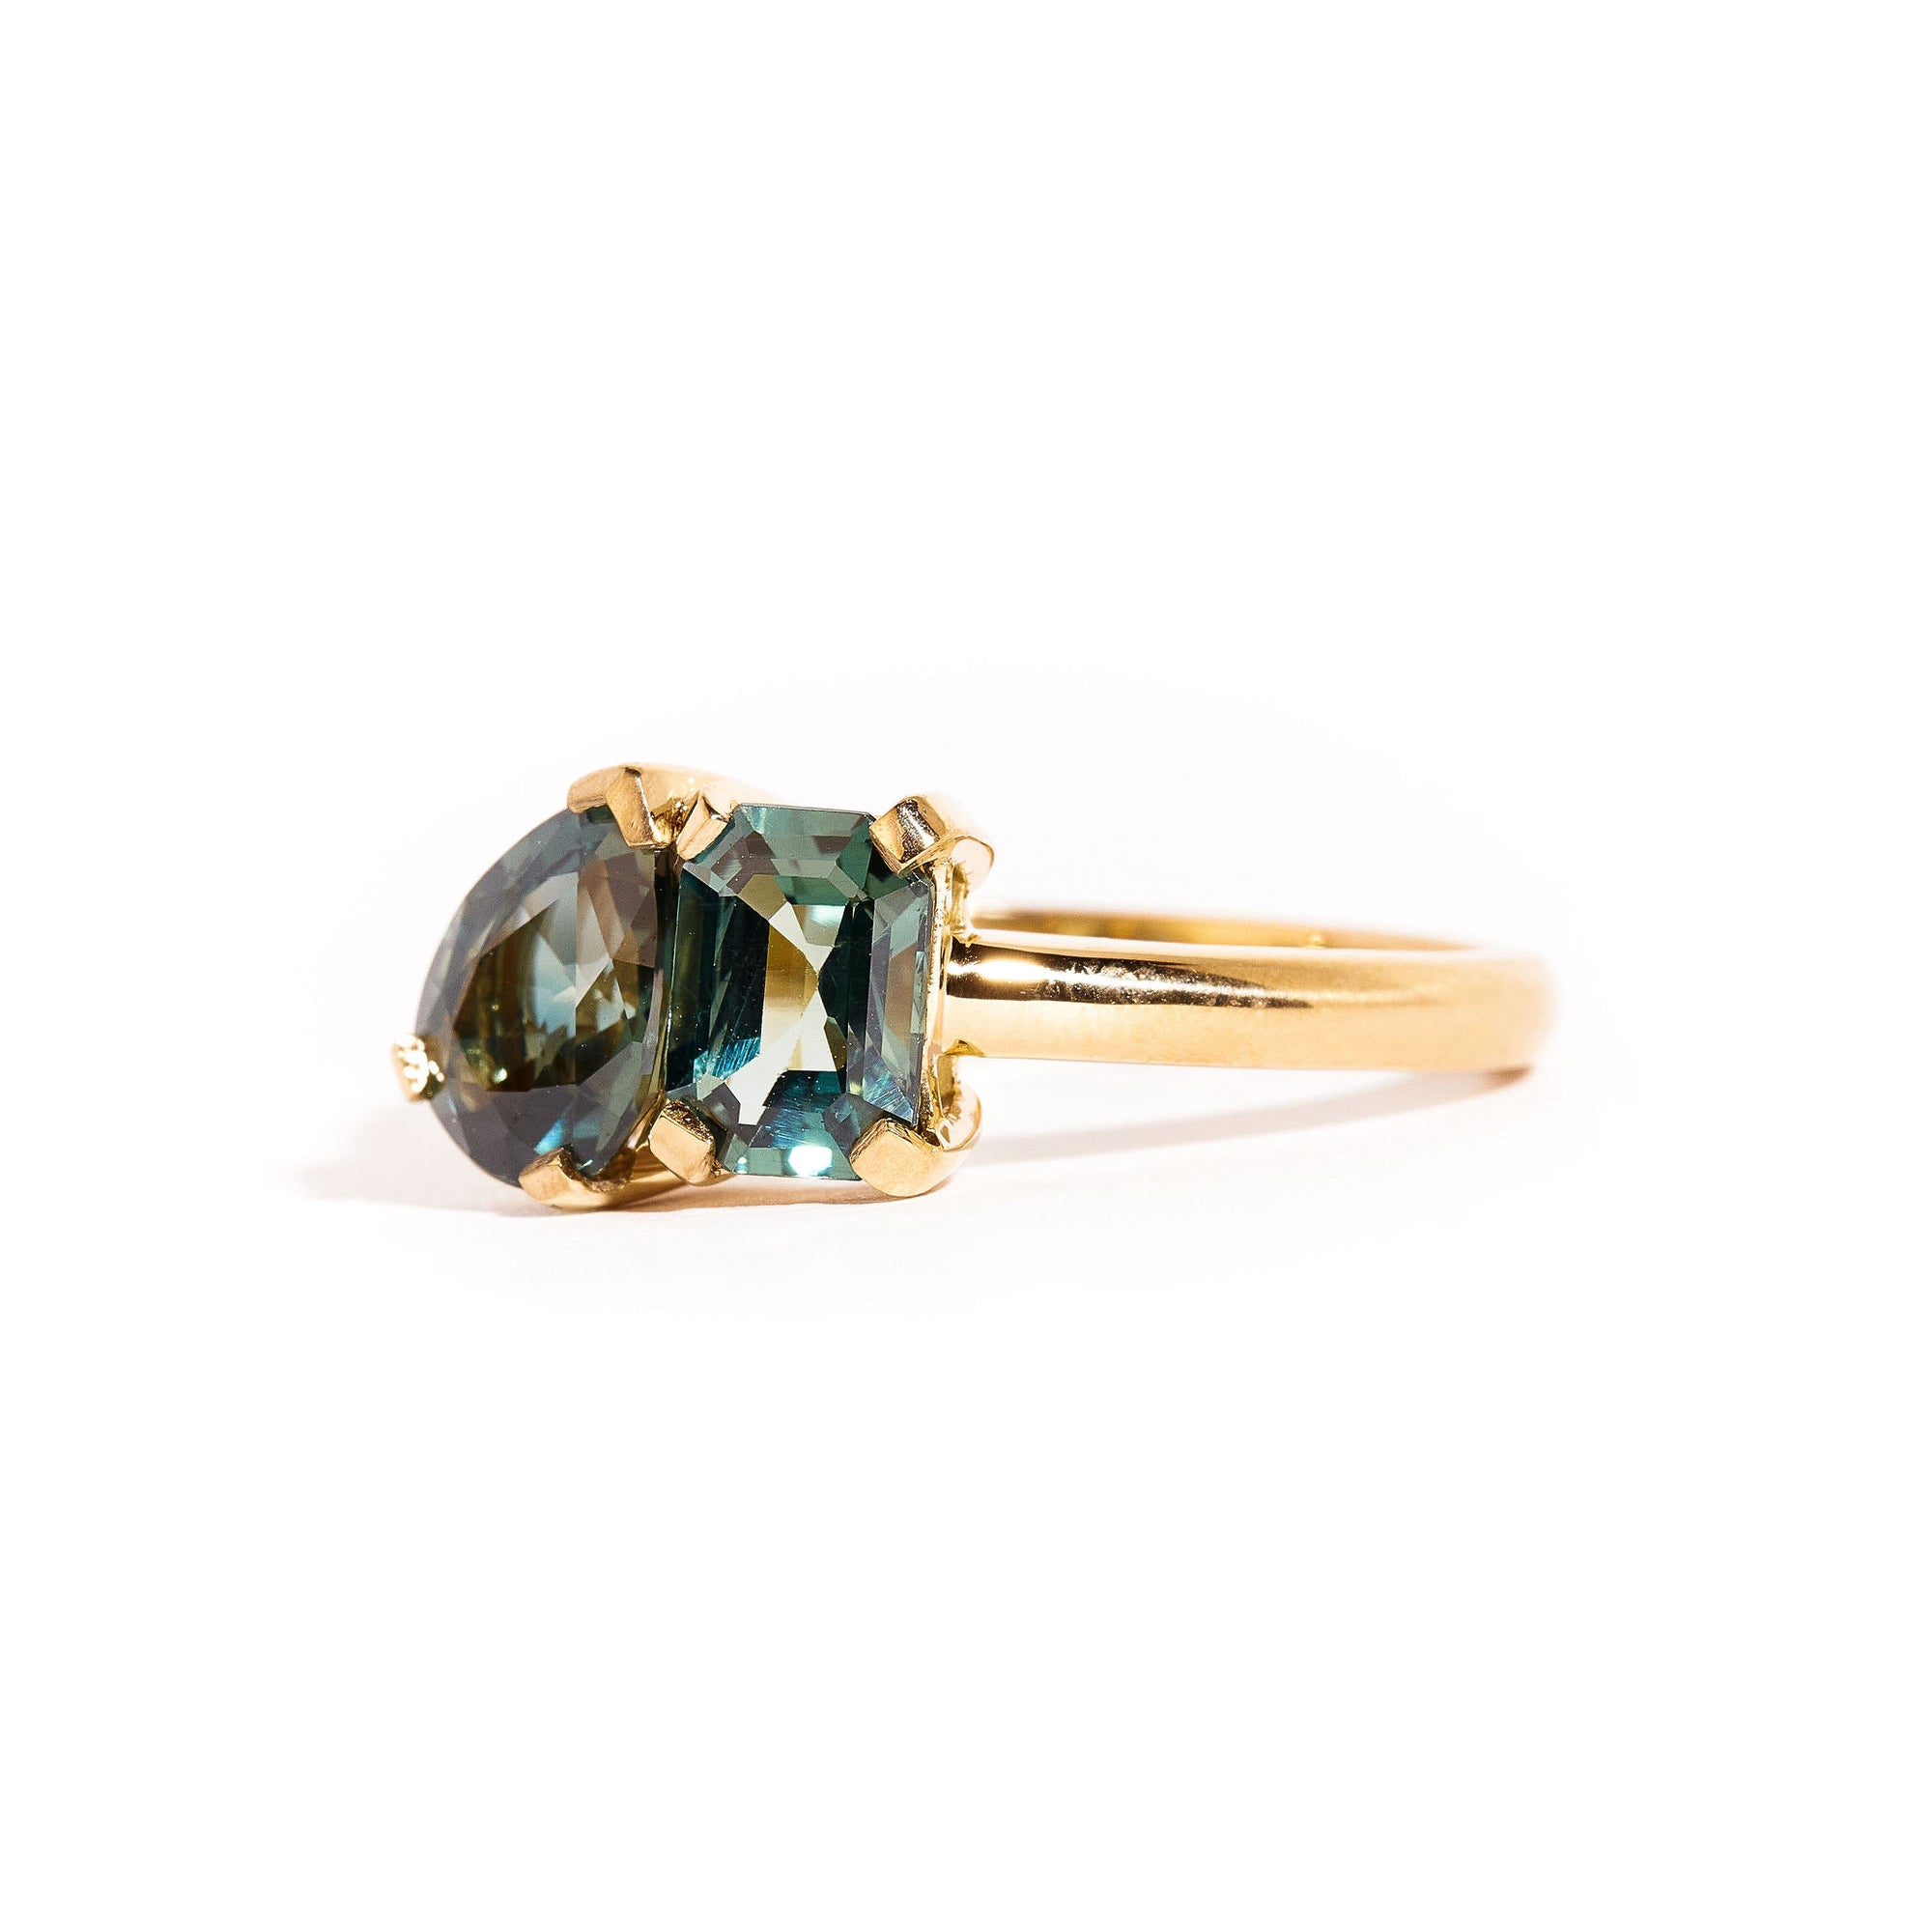 Pear Cut and Emerald Cut Toi et Moi Sapphire Ring in 18ct Yellow Gold